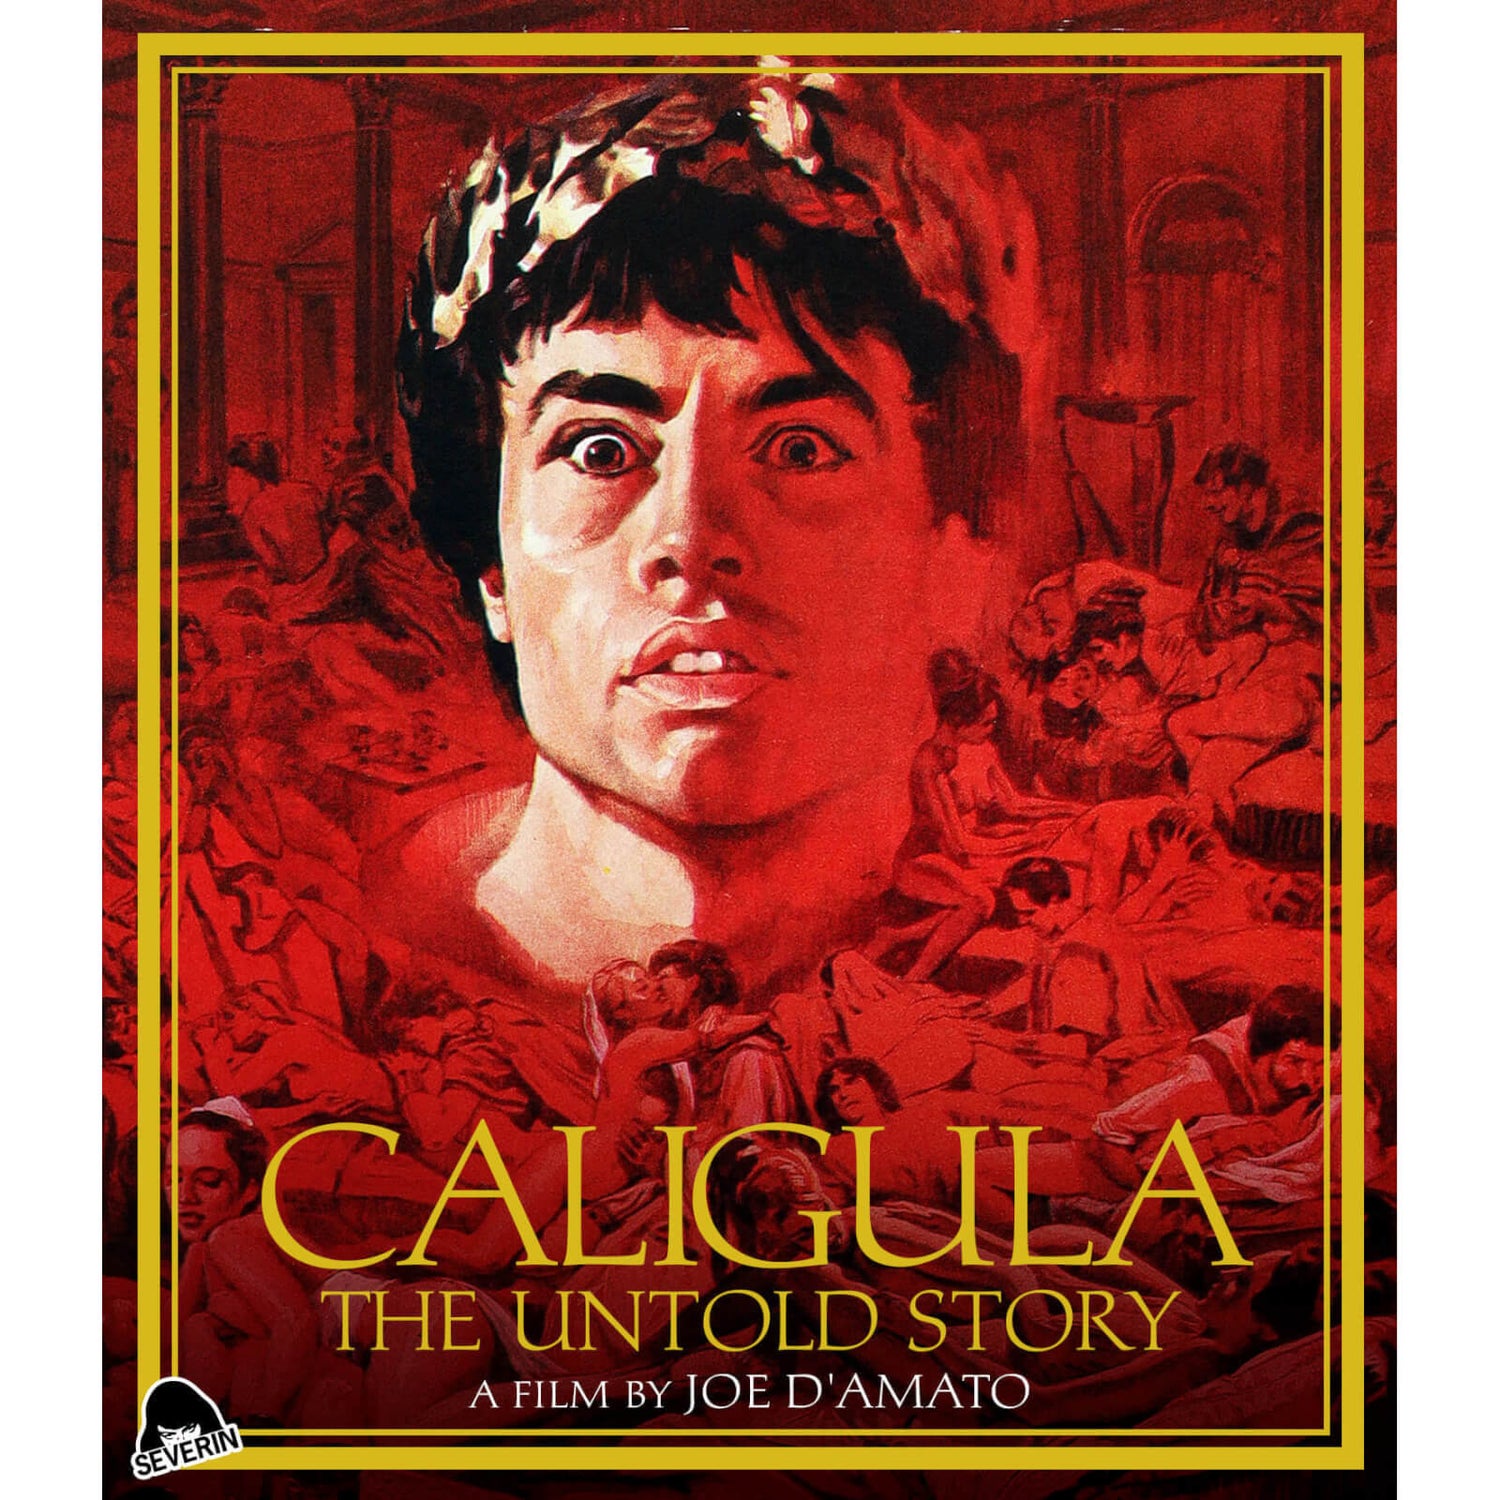 Caligula: The Untold Story (Includes CD) (US Import)